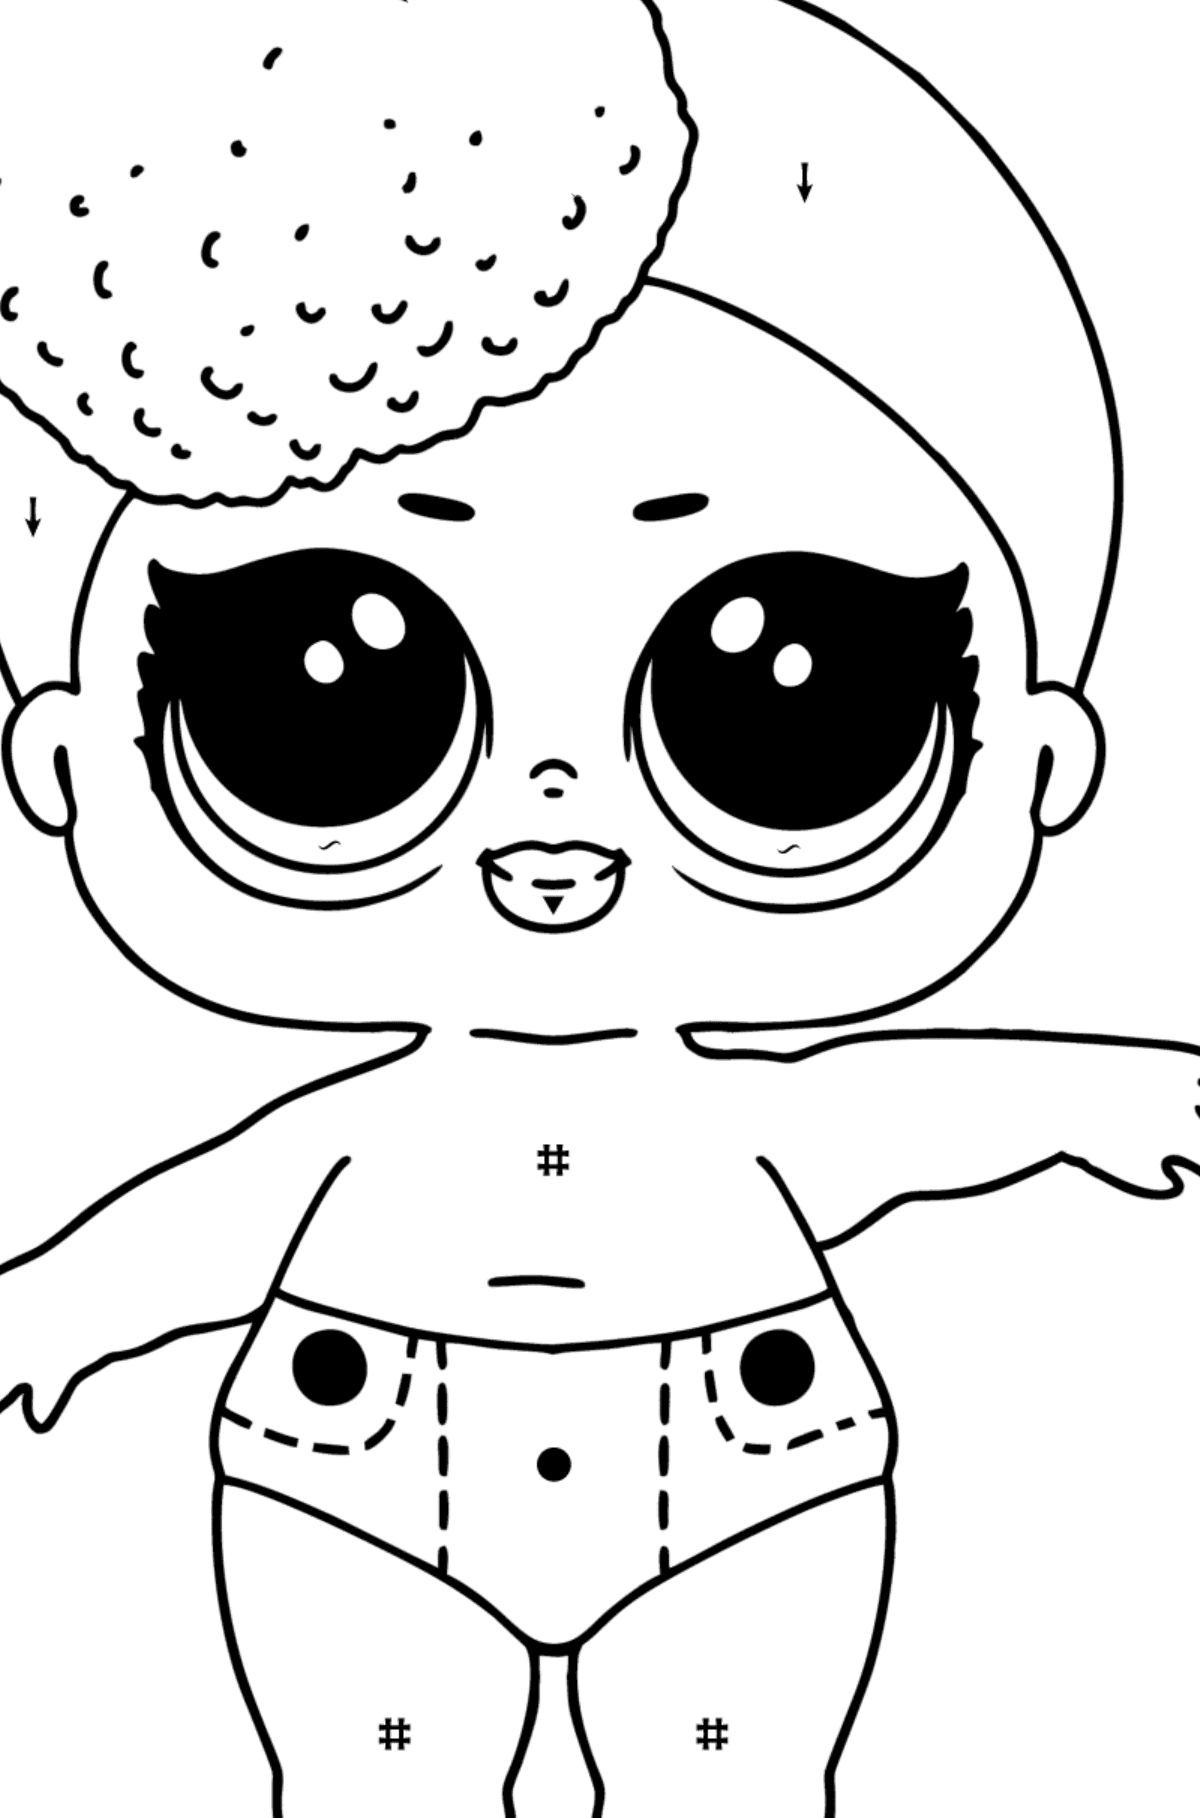 Coloring page LOL LIL Independent - Coloring by Symbols for Kids